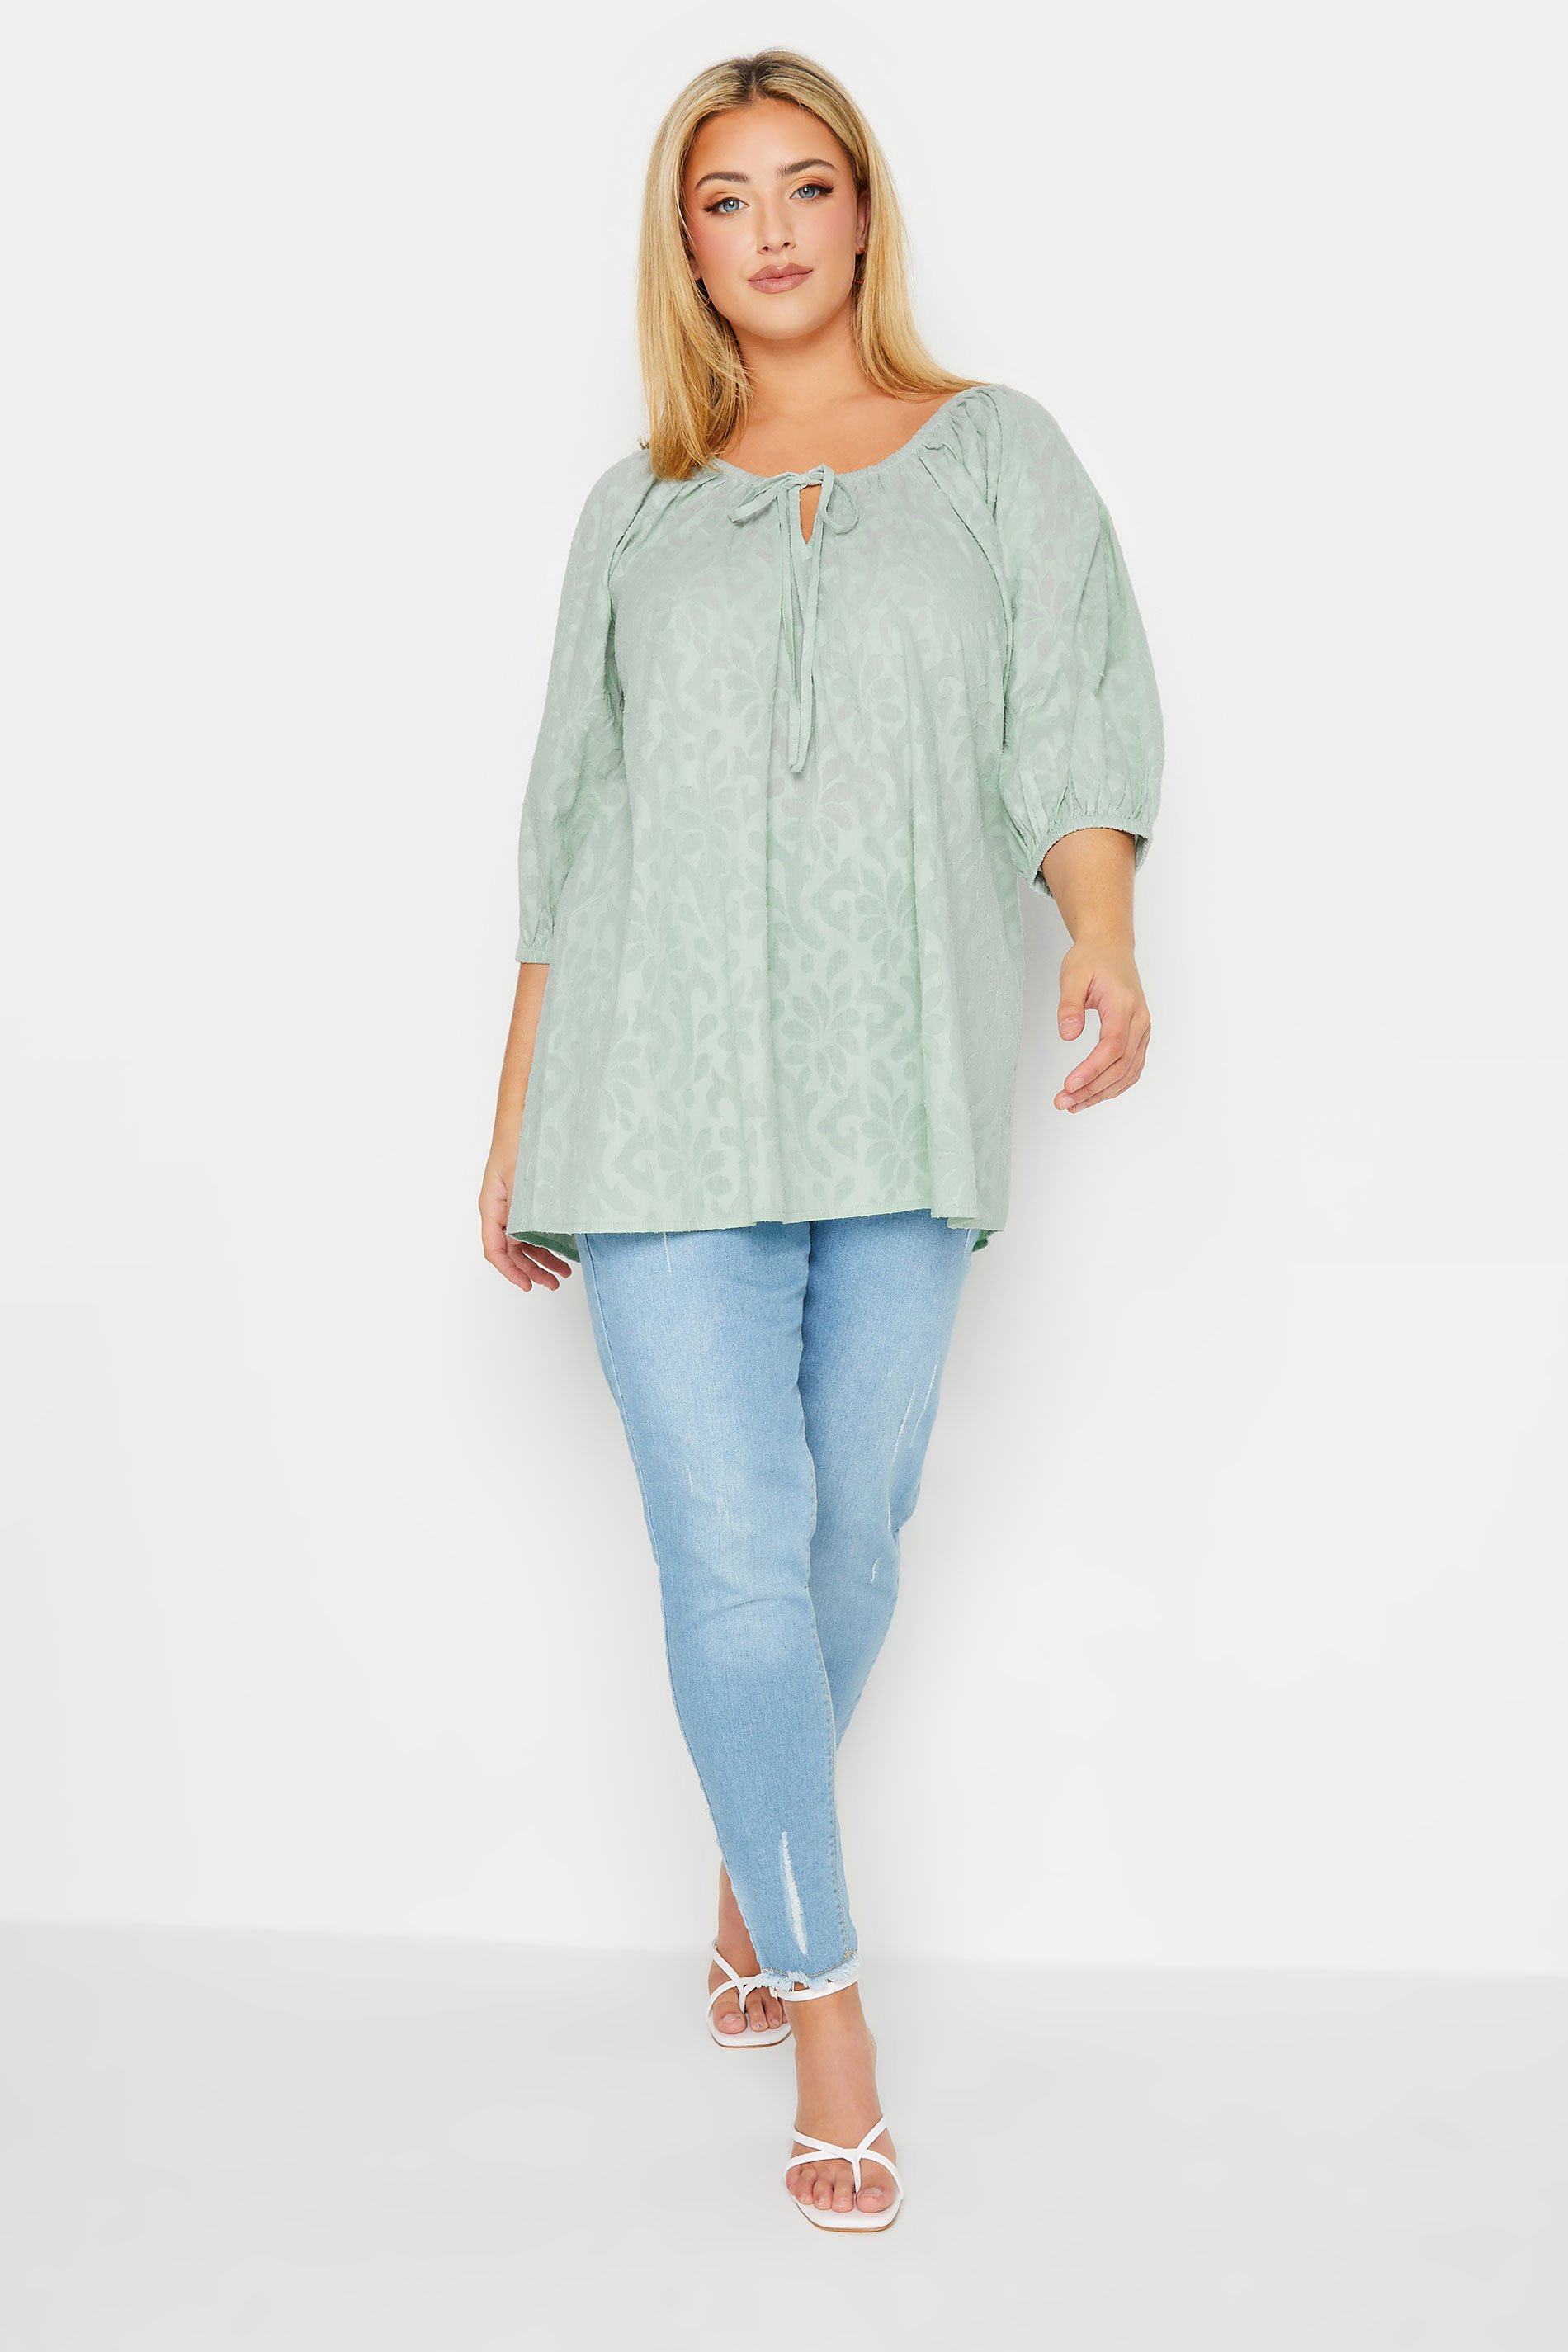 YOURS Plus Size Mint Green Tie Neck Textured Top | Yours Clothing 3